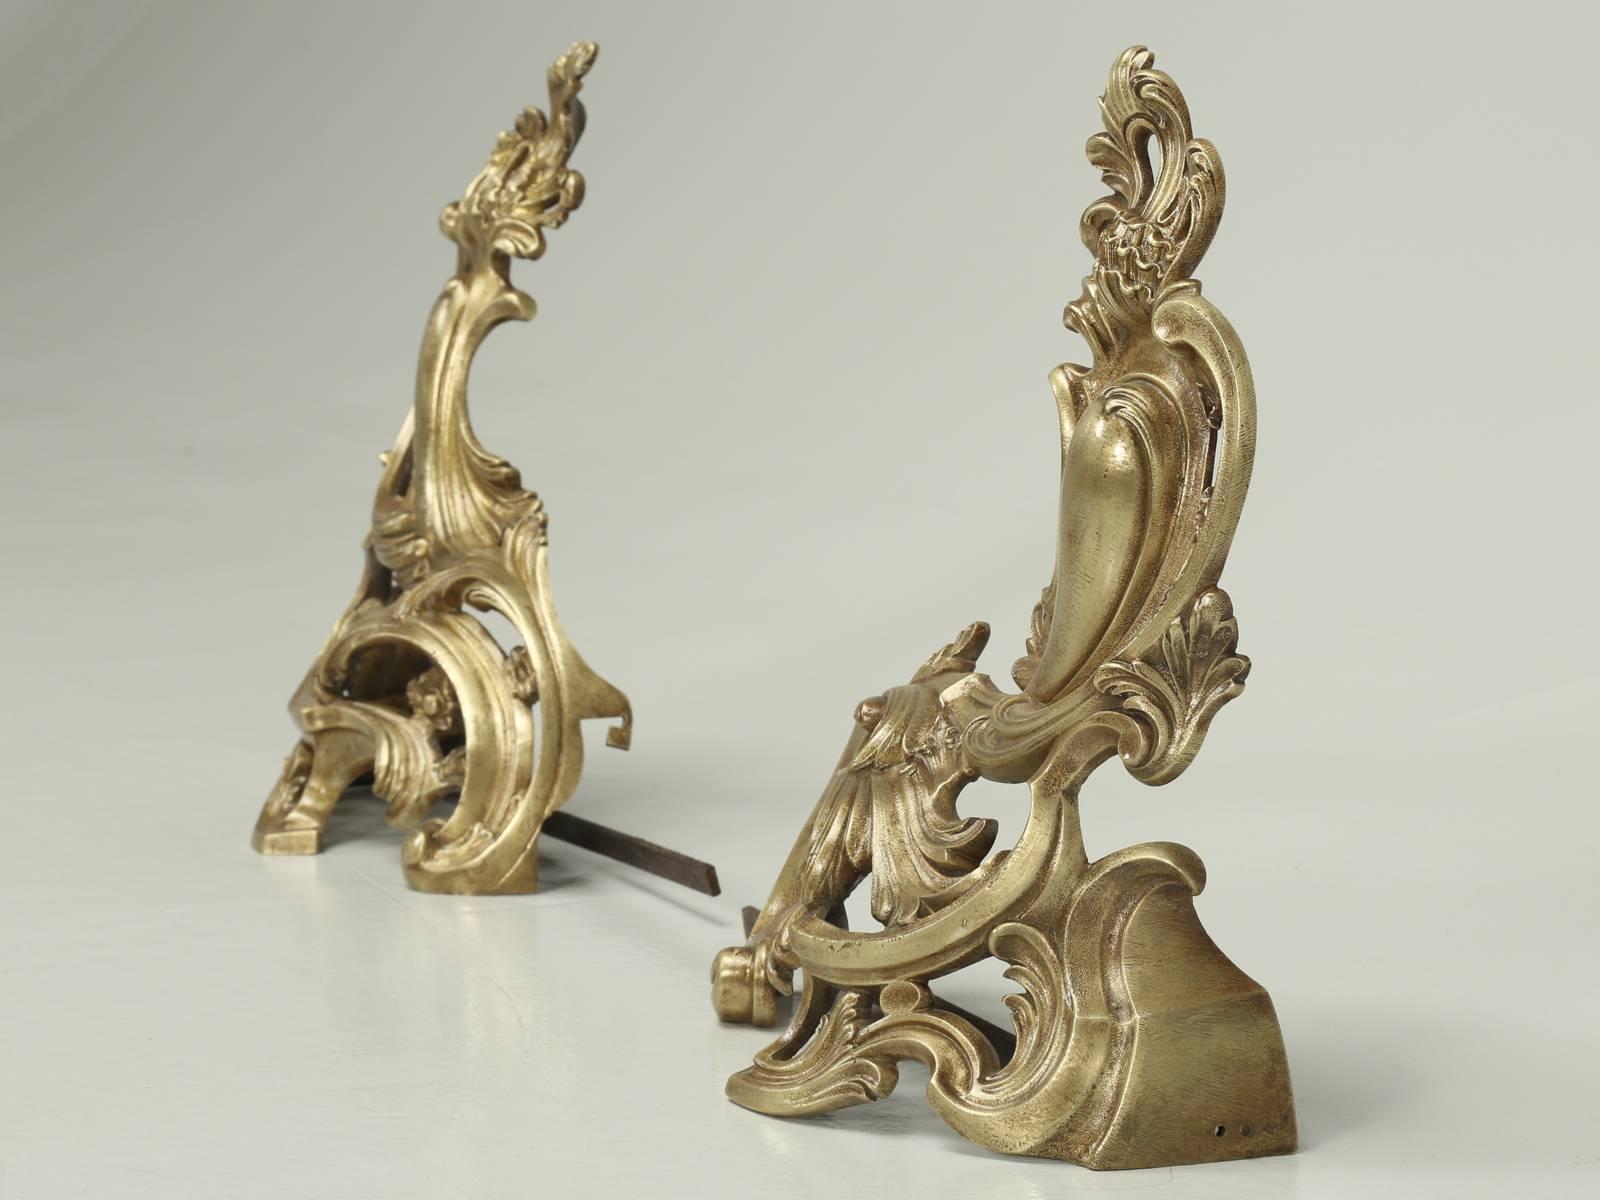 Antique French bronze andirons or chenets, done in a Rococo style from the late 1800s. There are no previous repairs and all they required was a few hours of hand polishing. After which we applied a protective sealer to extend the life of the